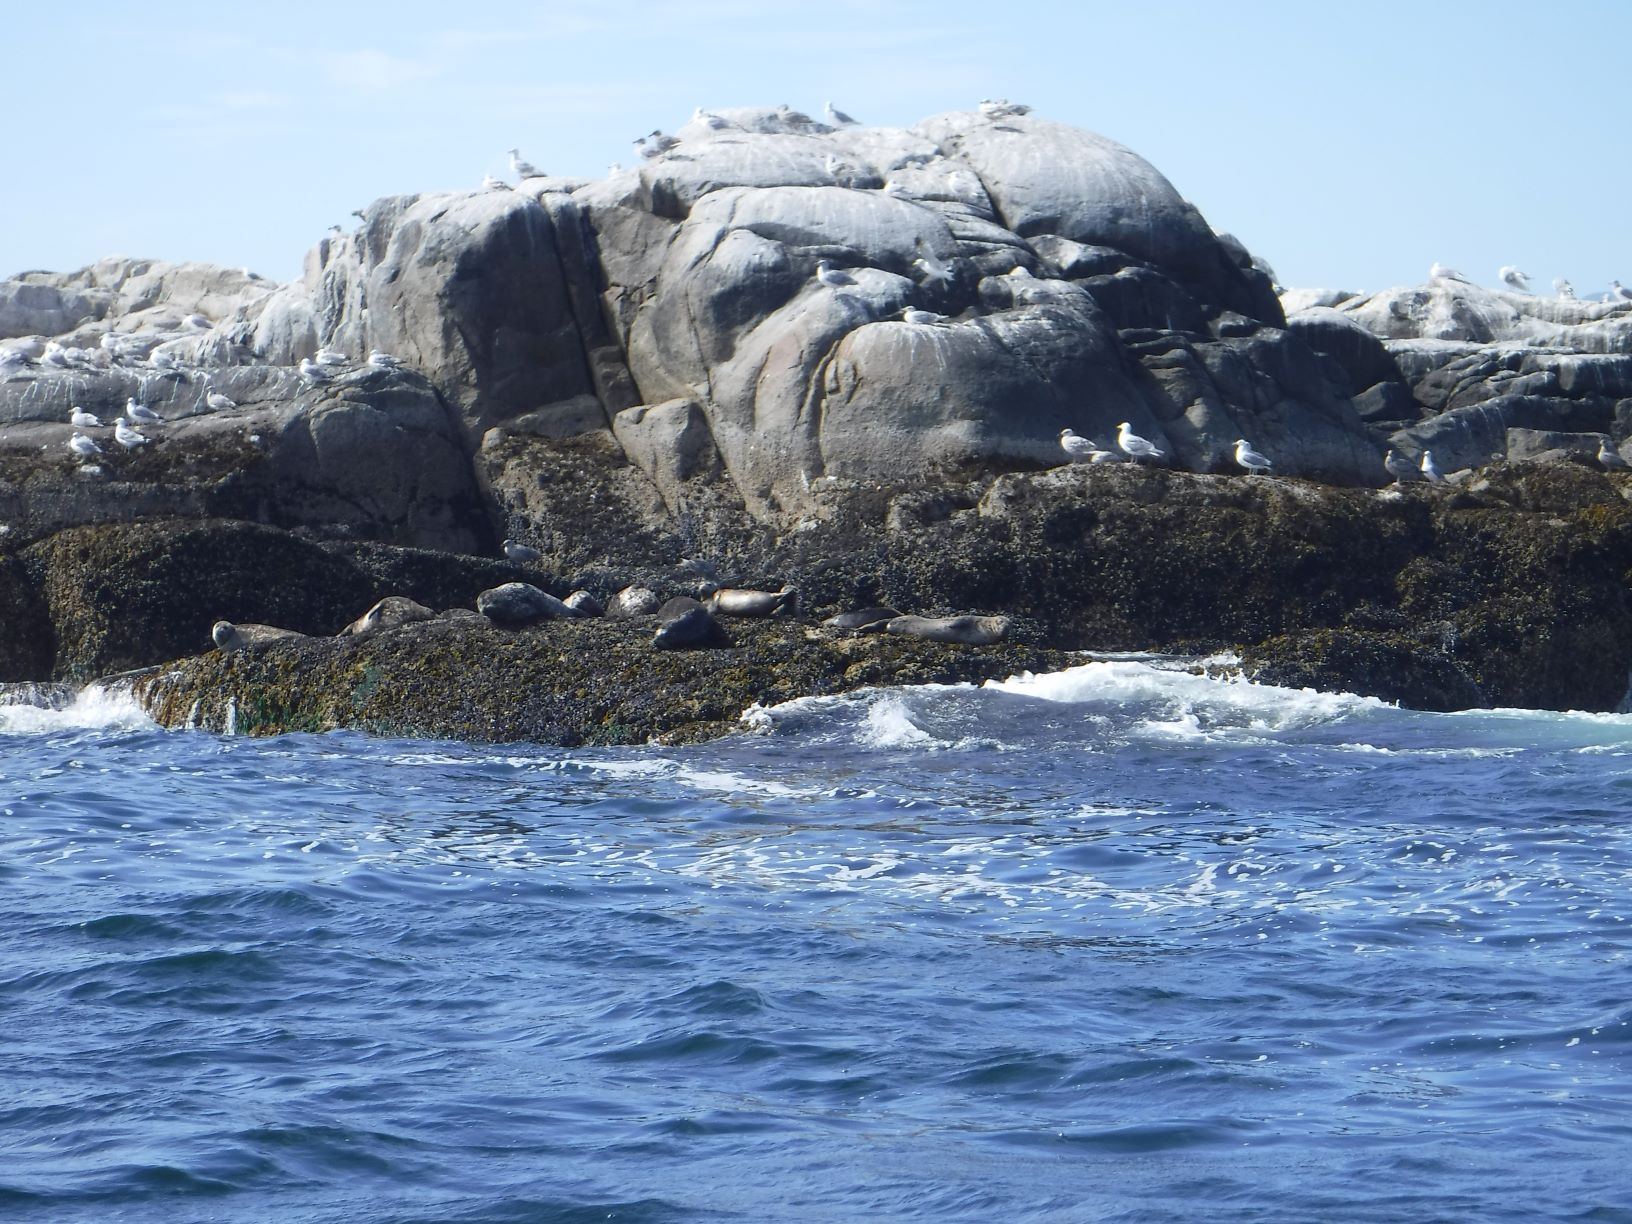 : Rivers Inlet is a paradise for marine mammals. Whales and orcas are usually seen, and some of the rocky islands are favorite hauling-out places for seals and sea lions.